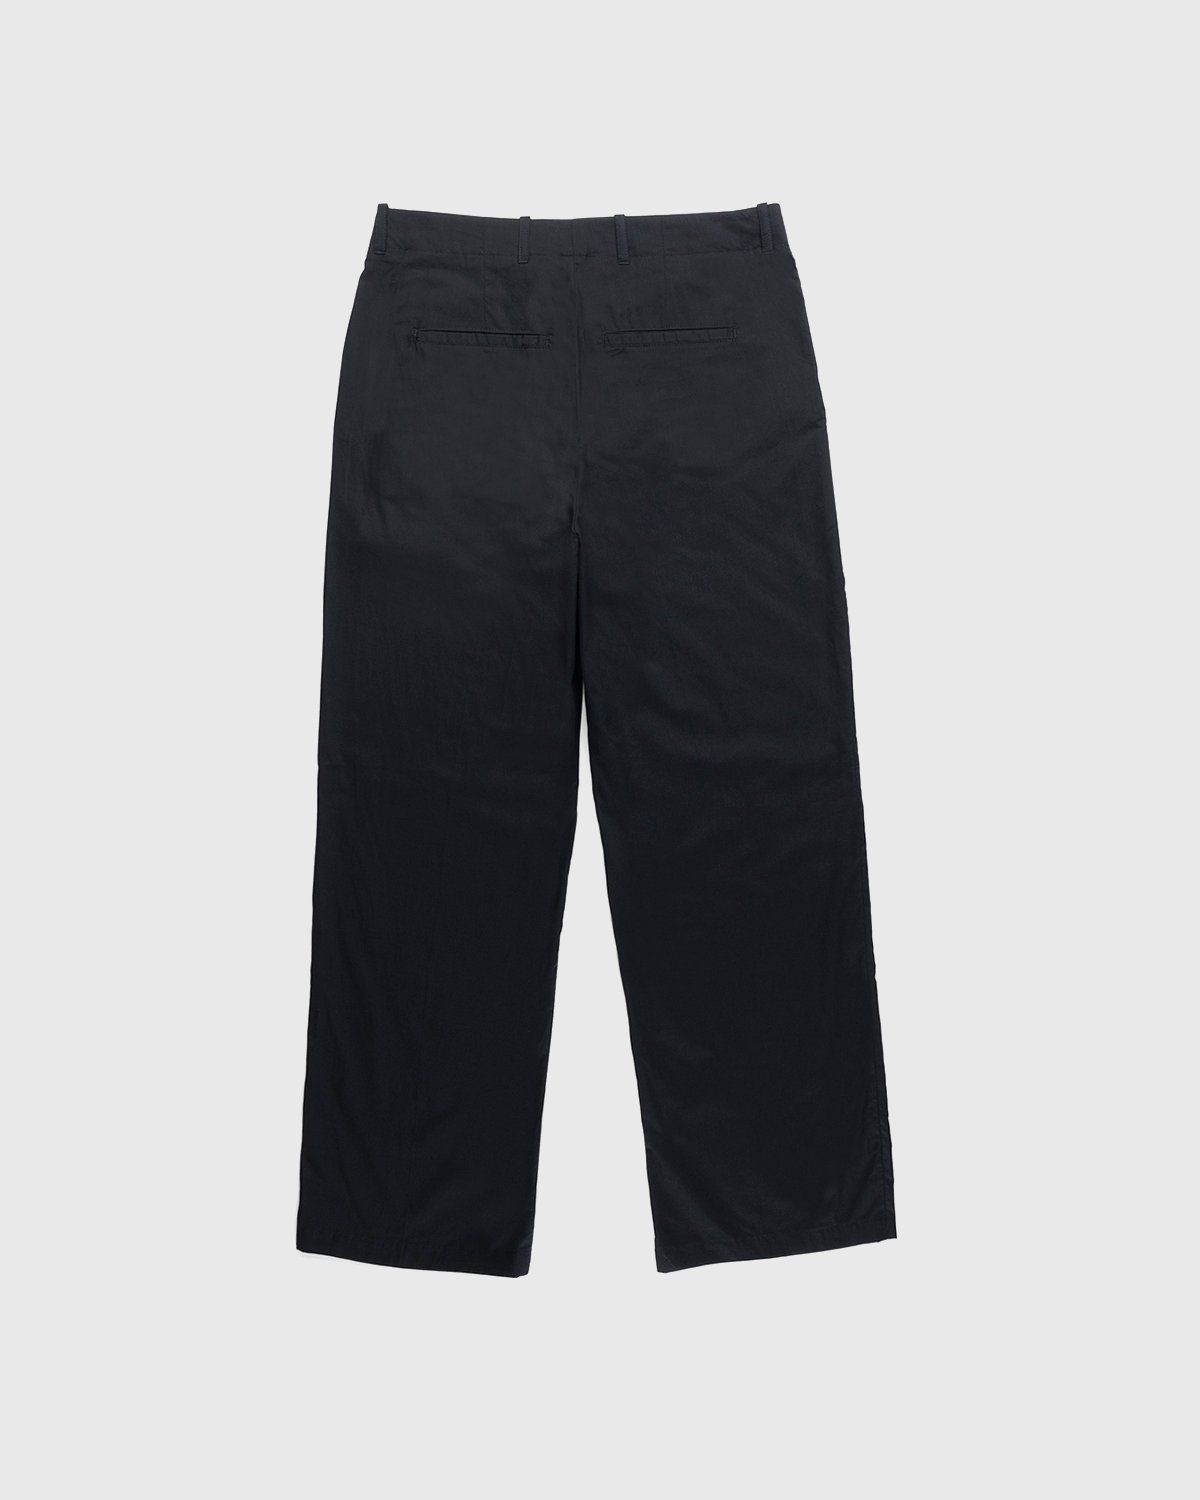 Our Legacy – Borrowed Chino Black Voile - Pants - Black - Image 2